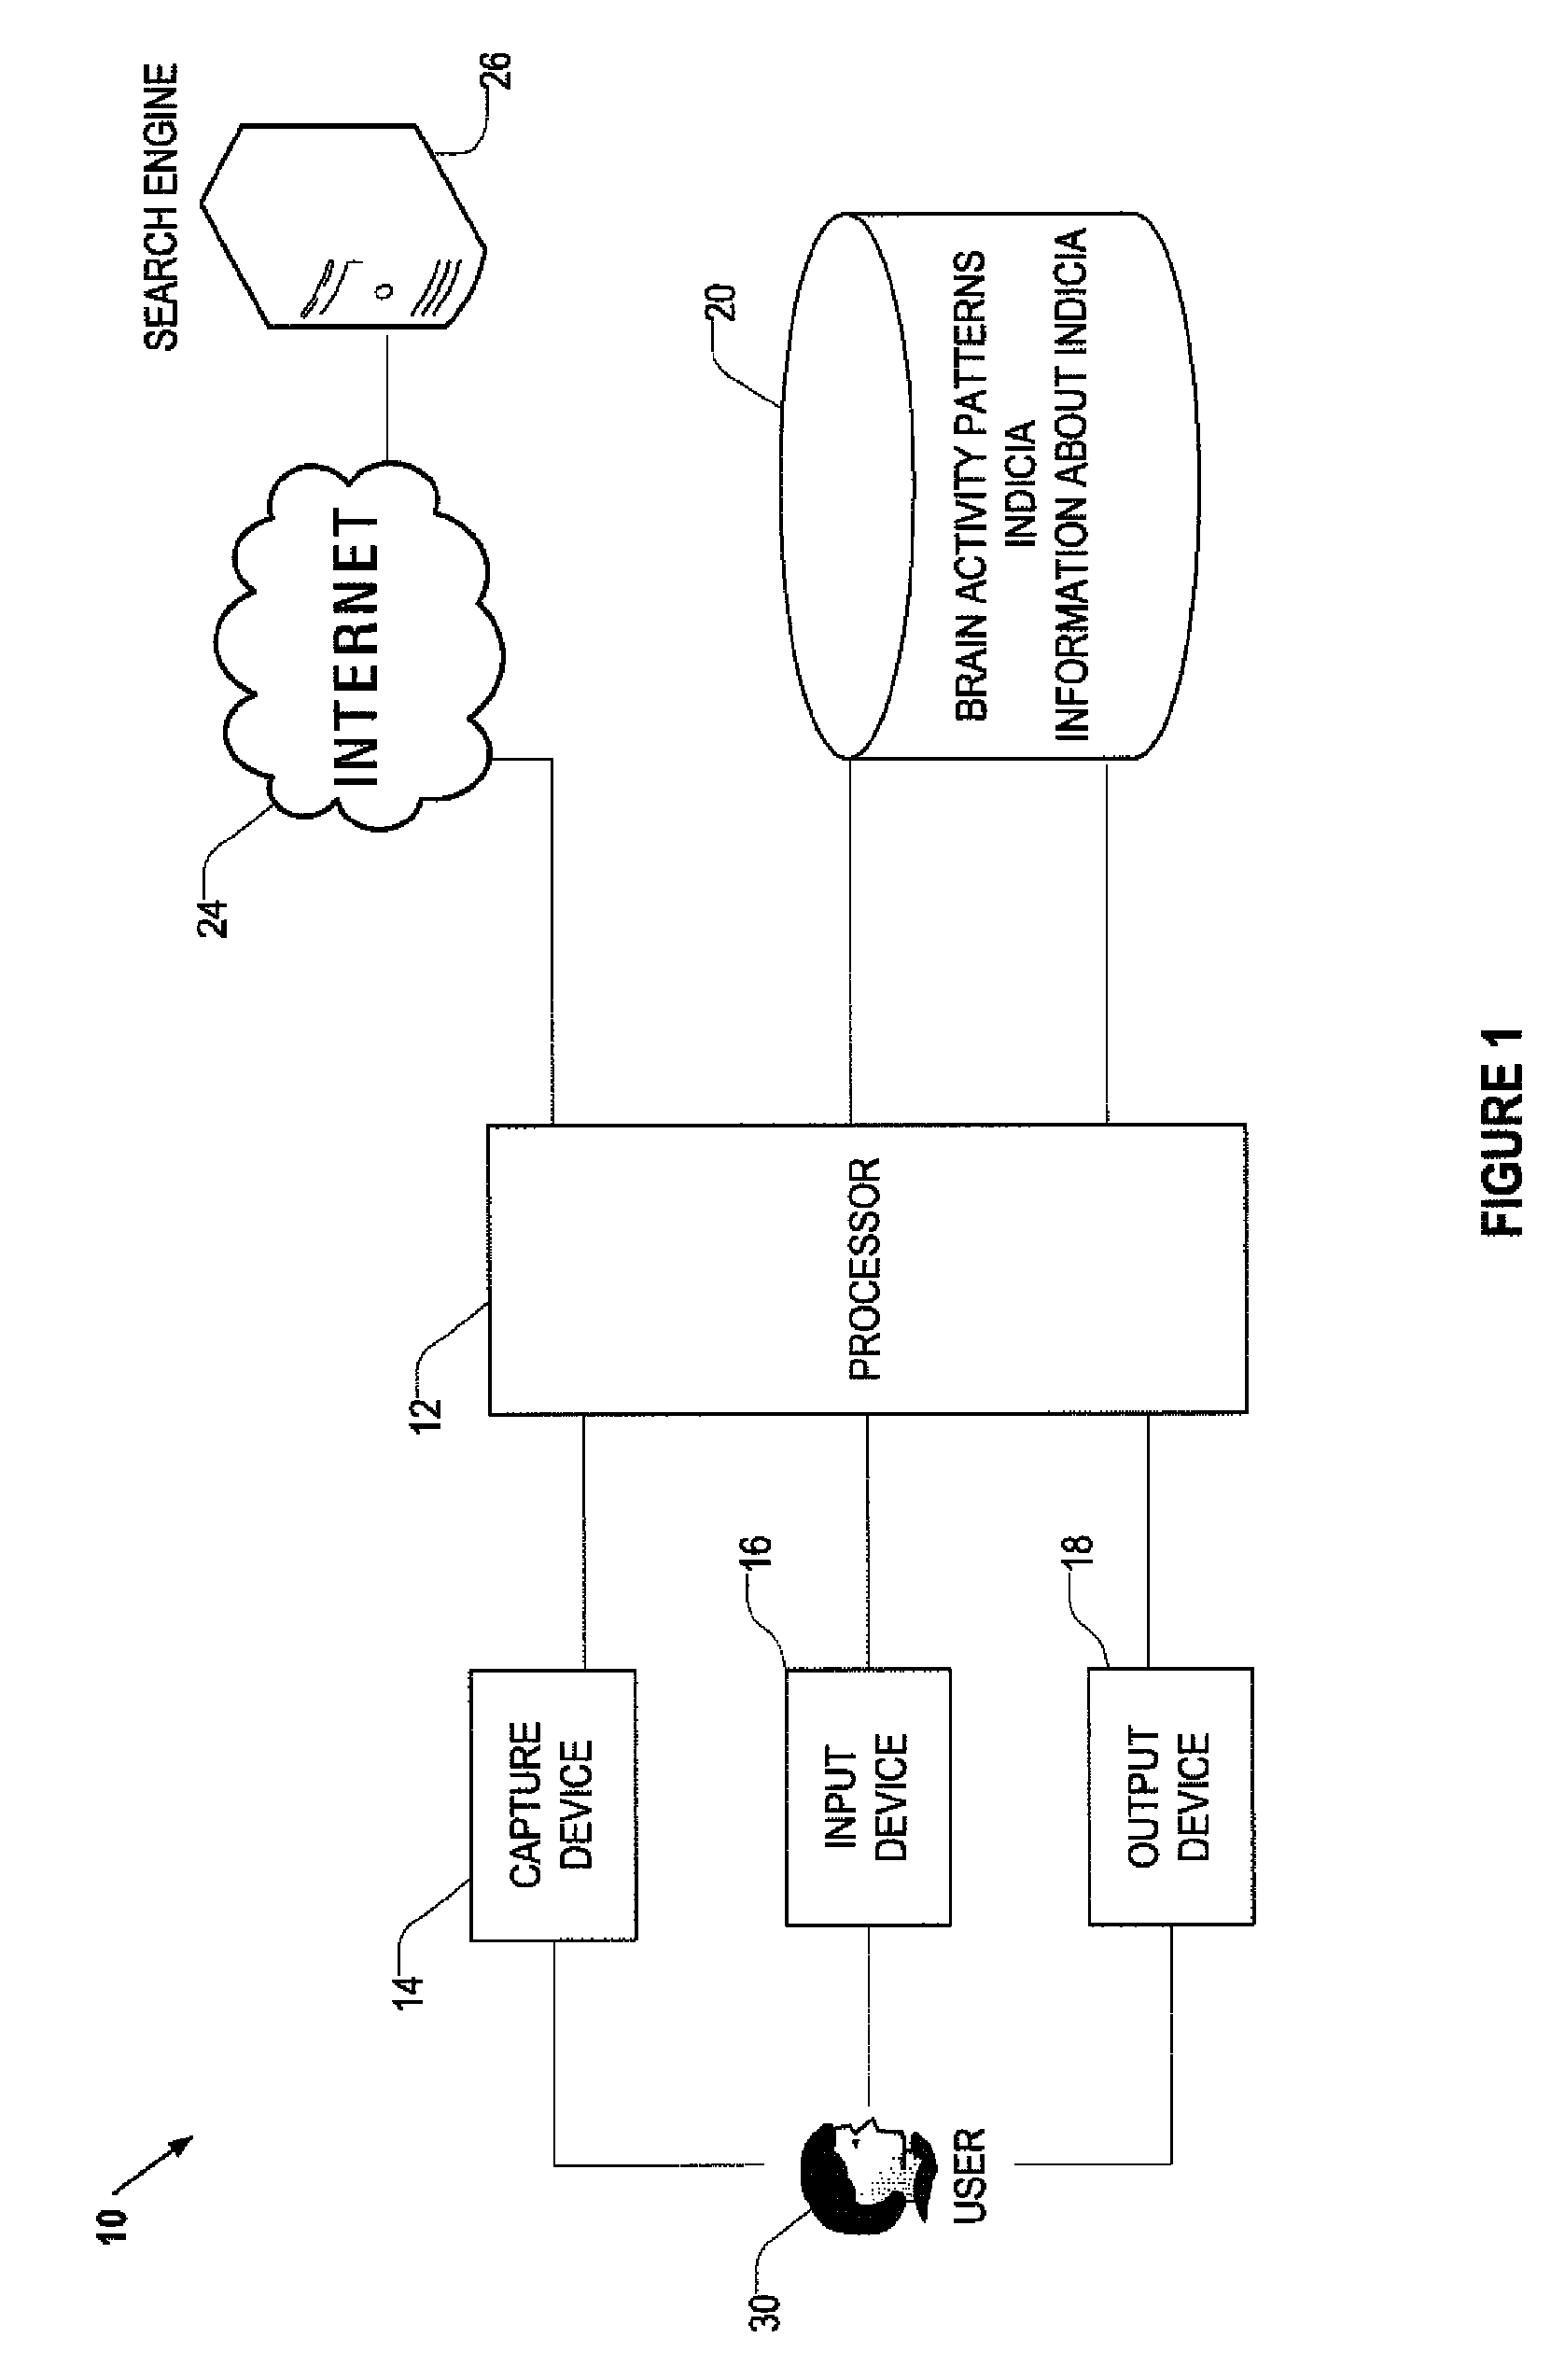 Systems and methods for communicating with a computer using brain activity patterns